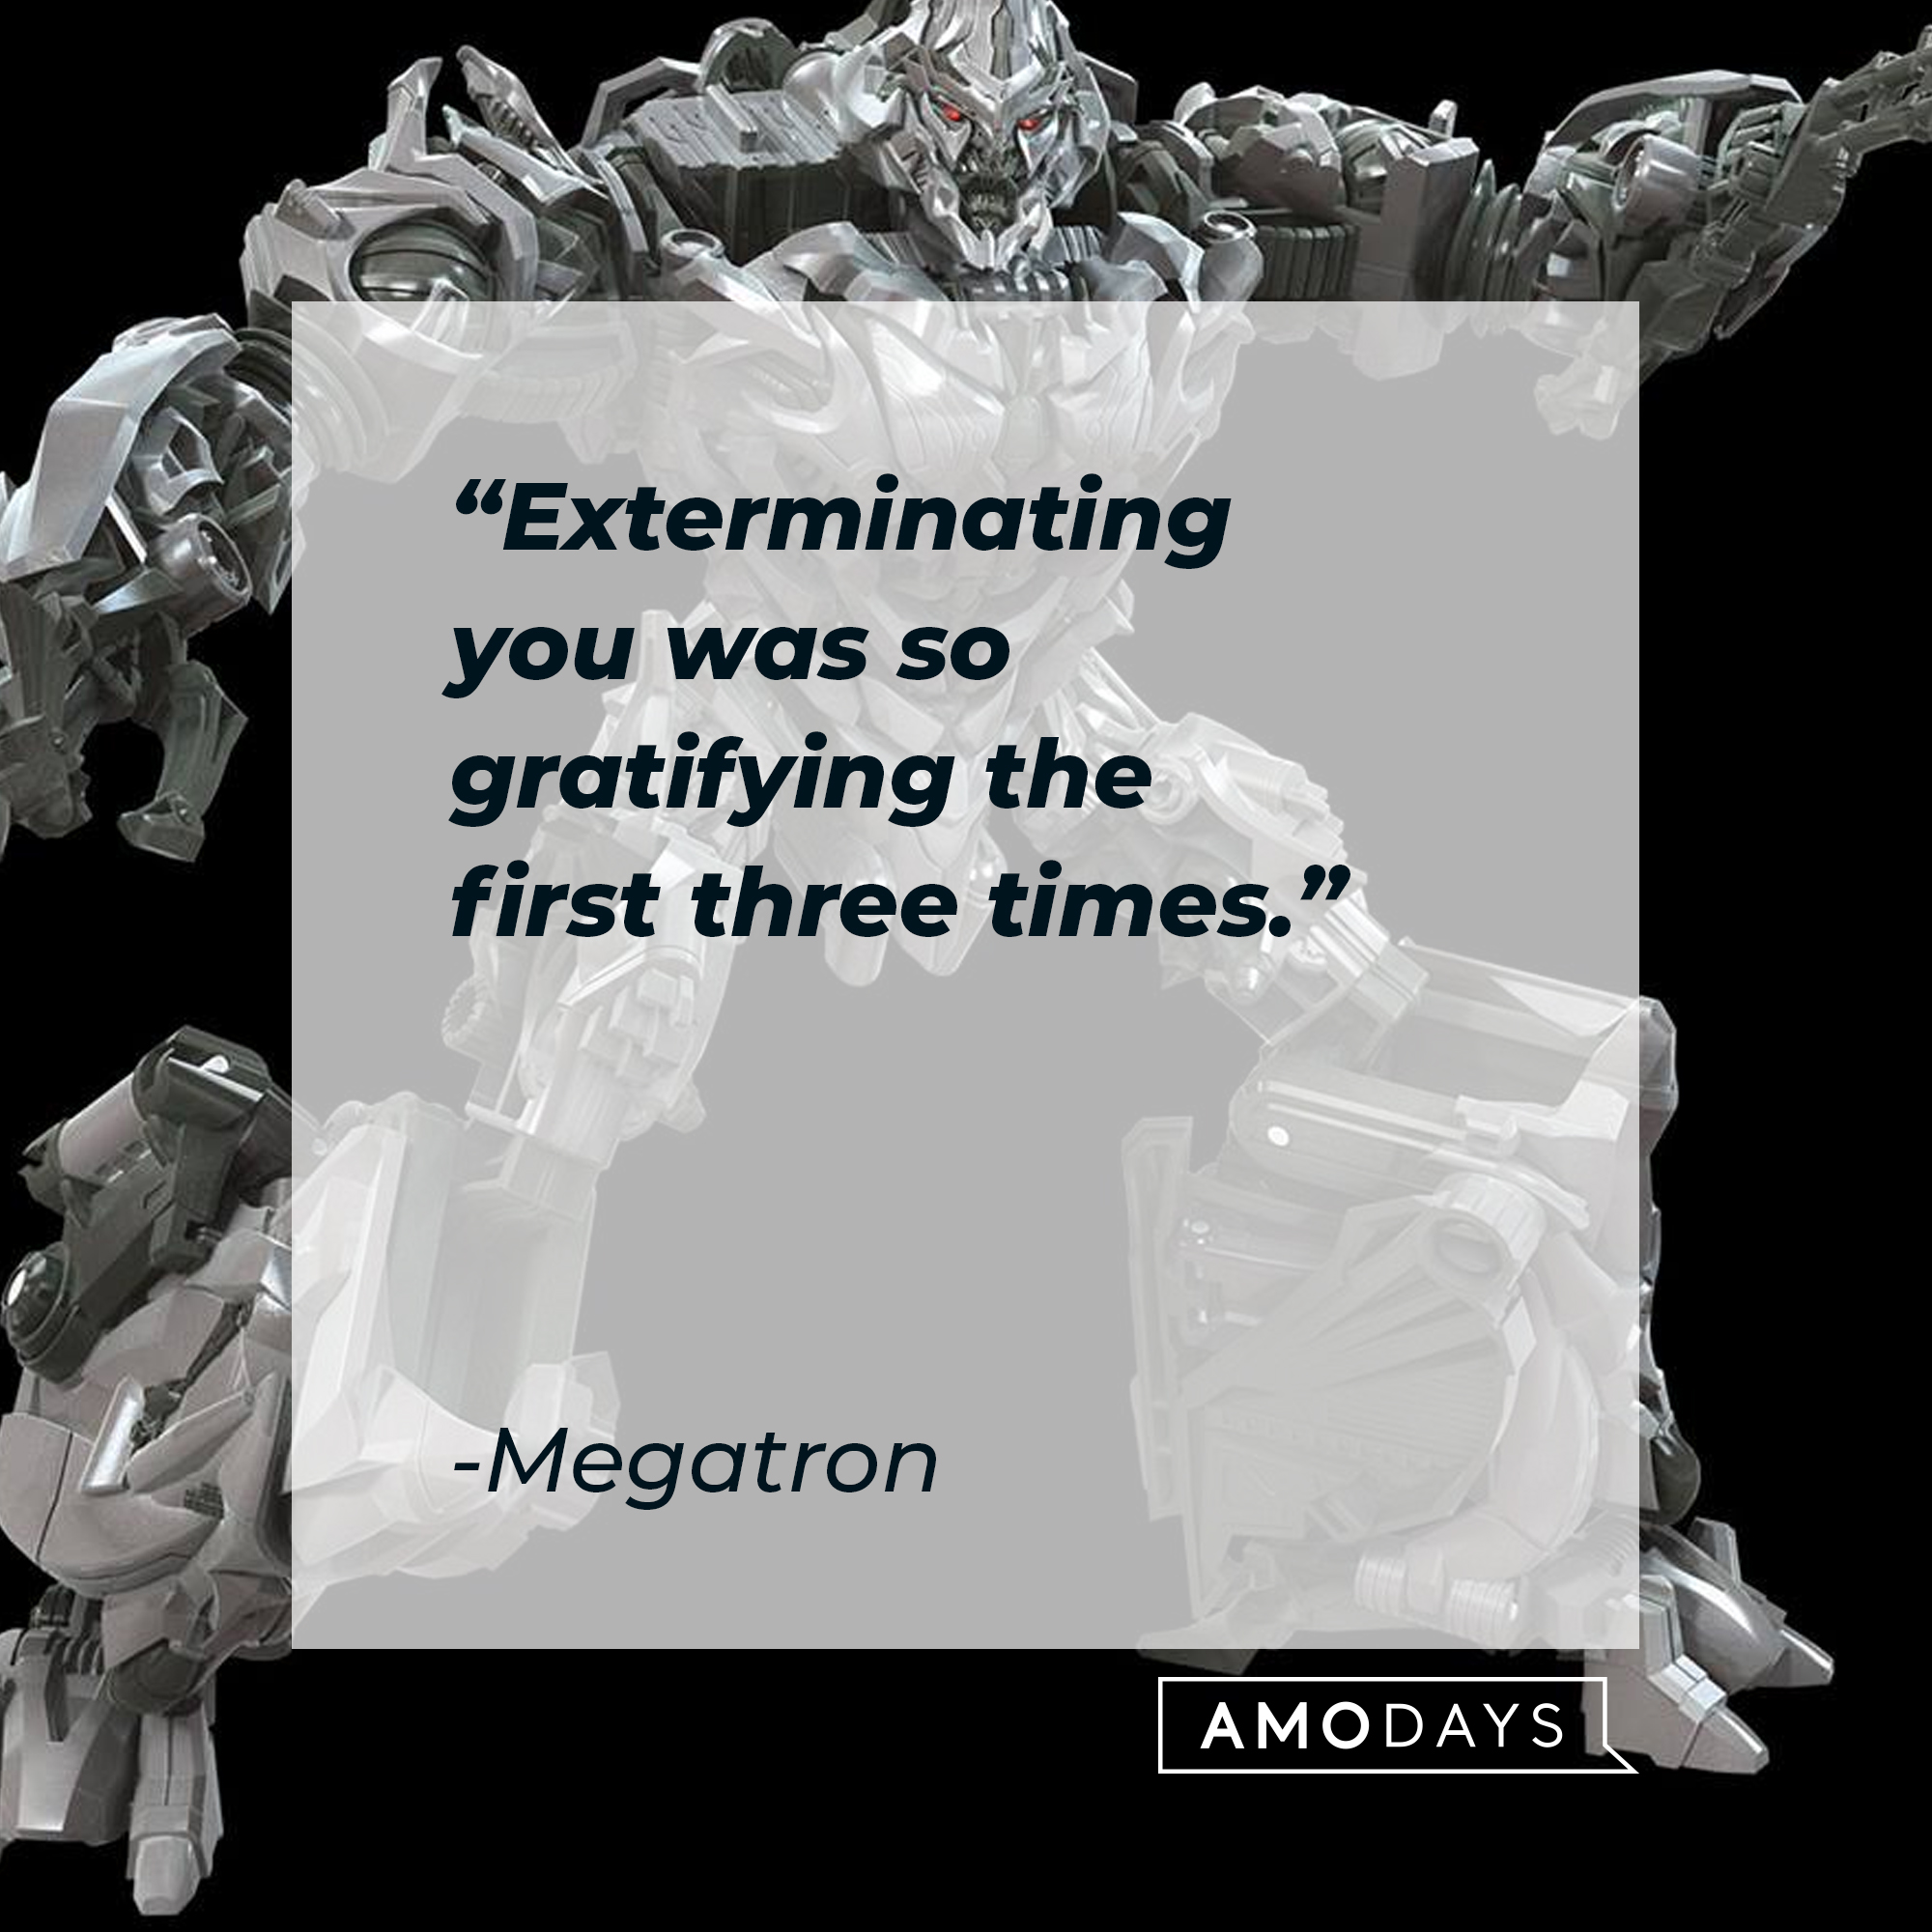 A photo of Megatron with his quote, "Exterminating you was so gratifying the first three times." | Source: Facebook/transformers